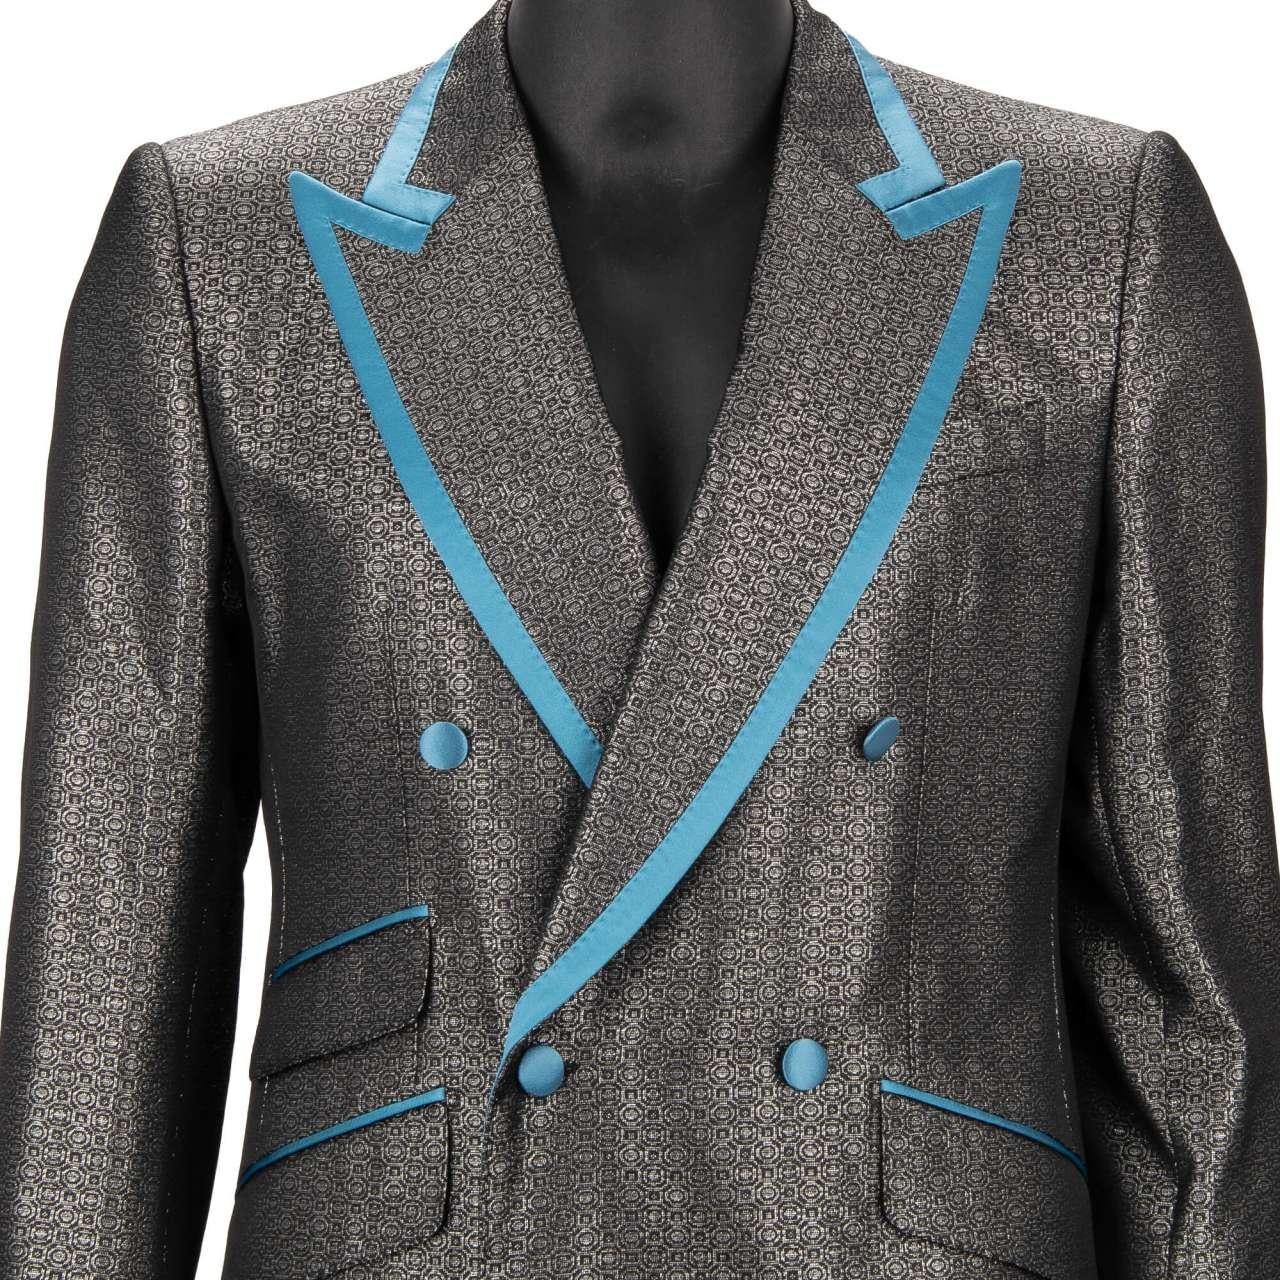 Dolce & Gabbana Glitter Jacquard Double breasted Suit Silver Blue 48 US 38 M For Sale 3